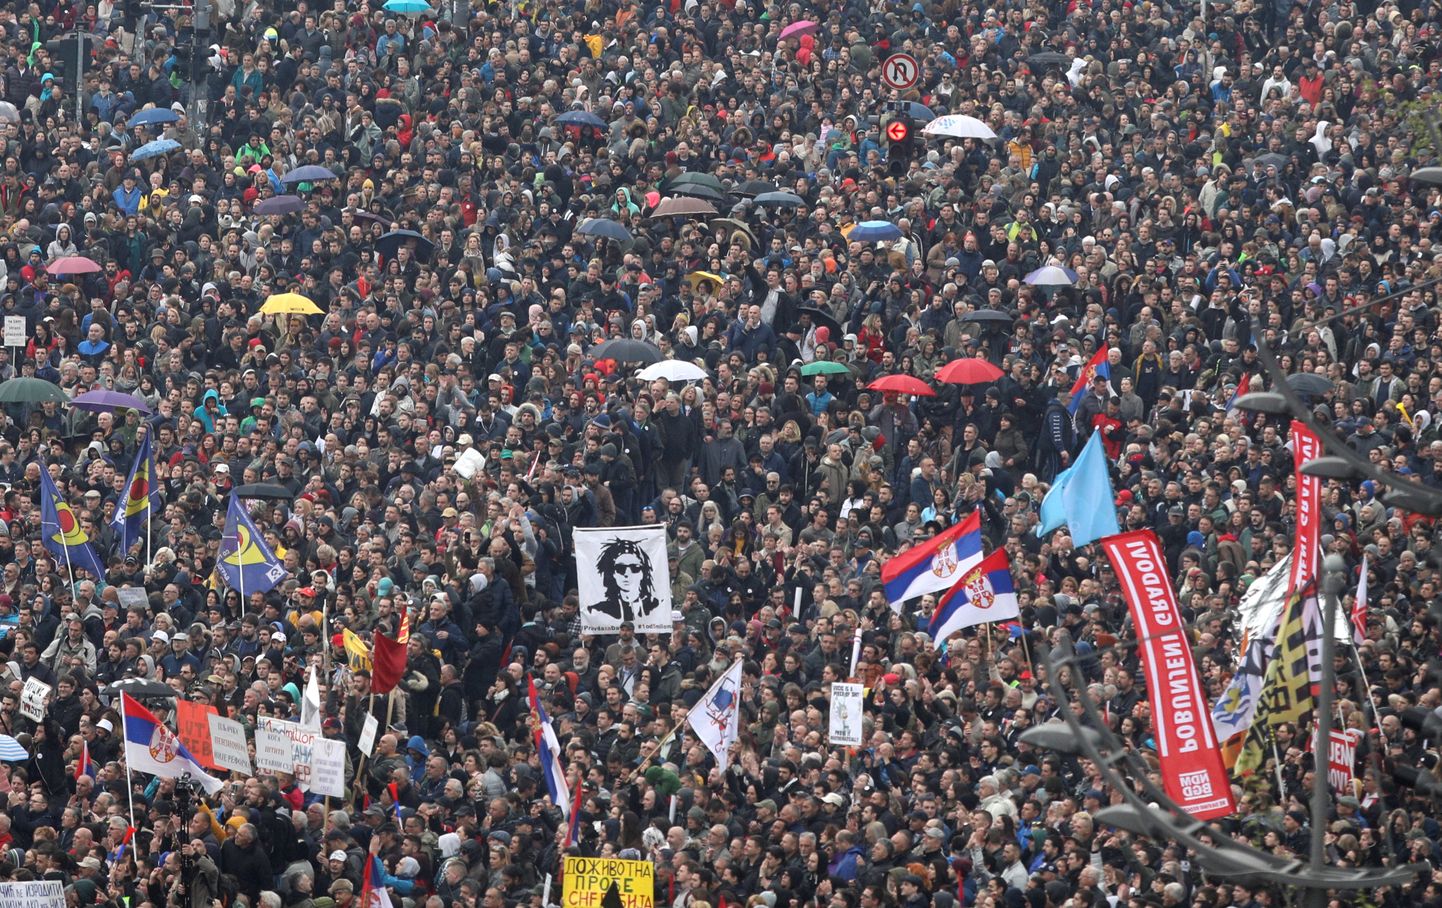 Demonstrators protest against Serbia's President Aleksandar Vucic and his government, in front of the Parliament Building in central Belgrade, Serbia, April 13, 2019. REUTERS/Djordje Kojadinovic